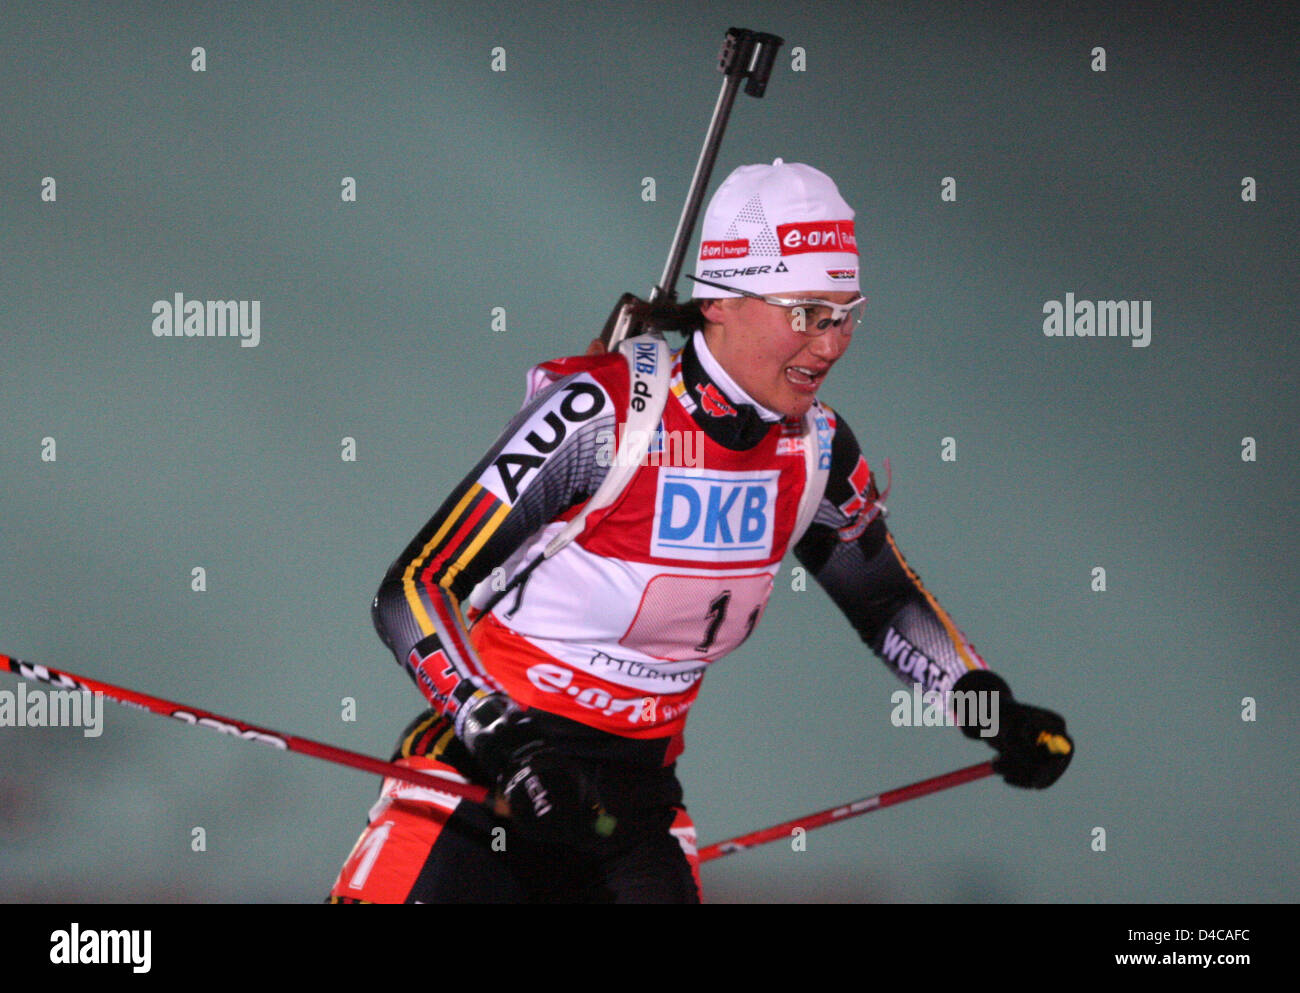 German Simone Denkinger is pictured in action during the 4x6 kilometres women's relay opening the Biathlon World Cup in Oberhof, Germany, 03 January 2008. Germany takes first place before France and Russia. Photo: Martin Schutt Stock Photo